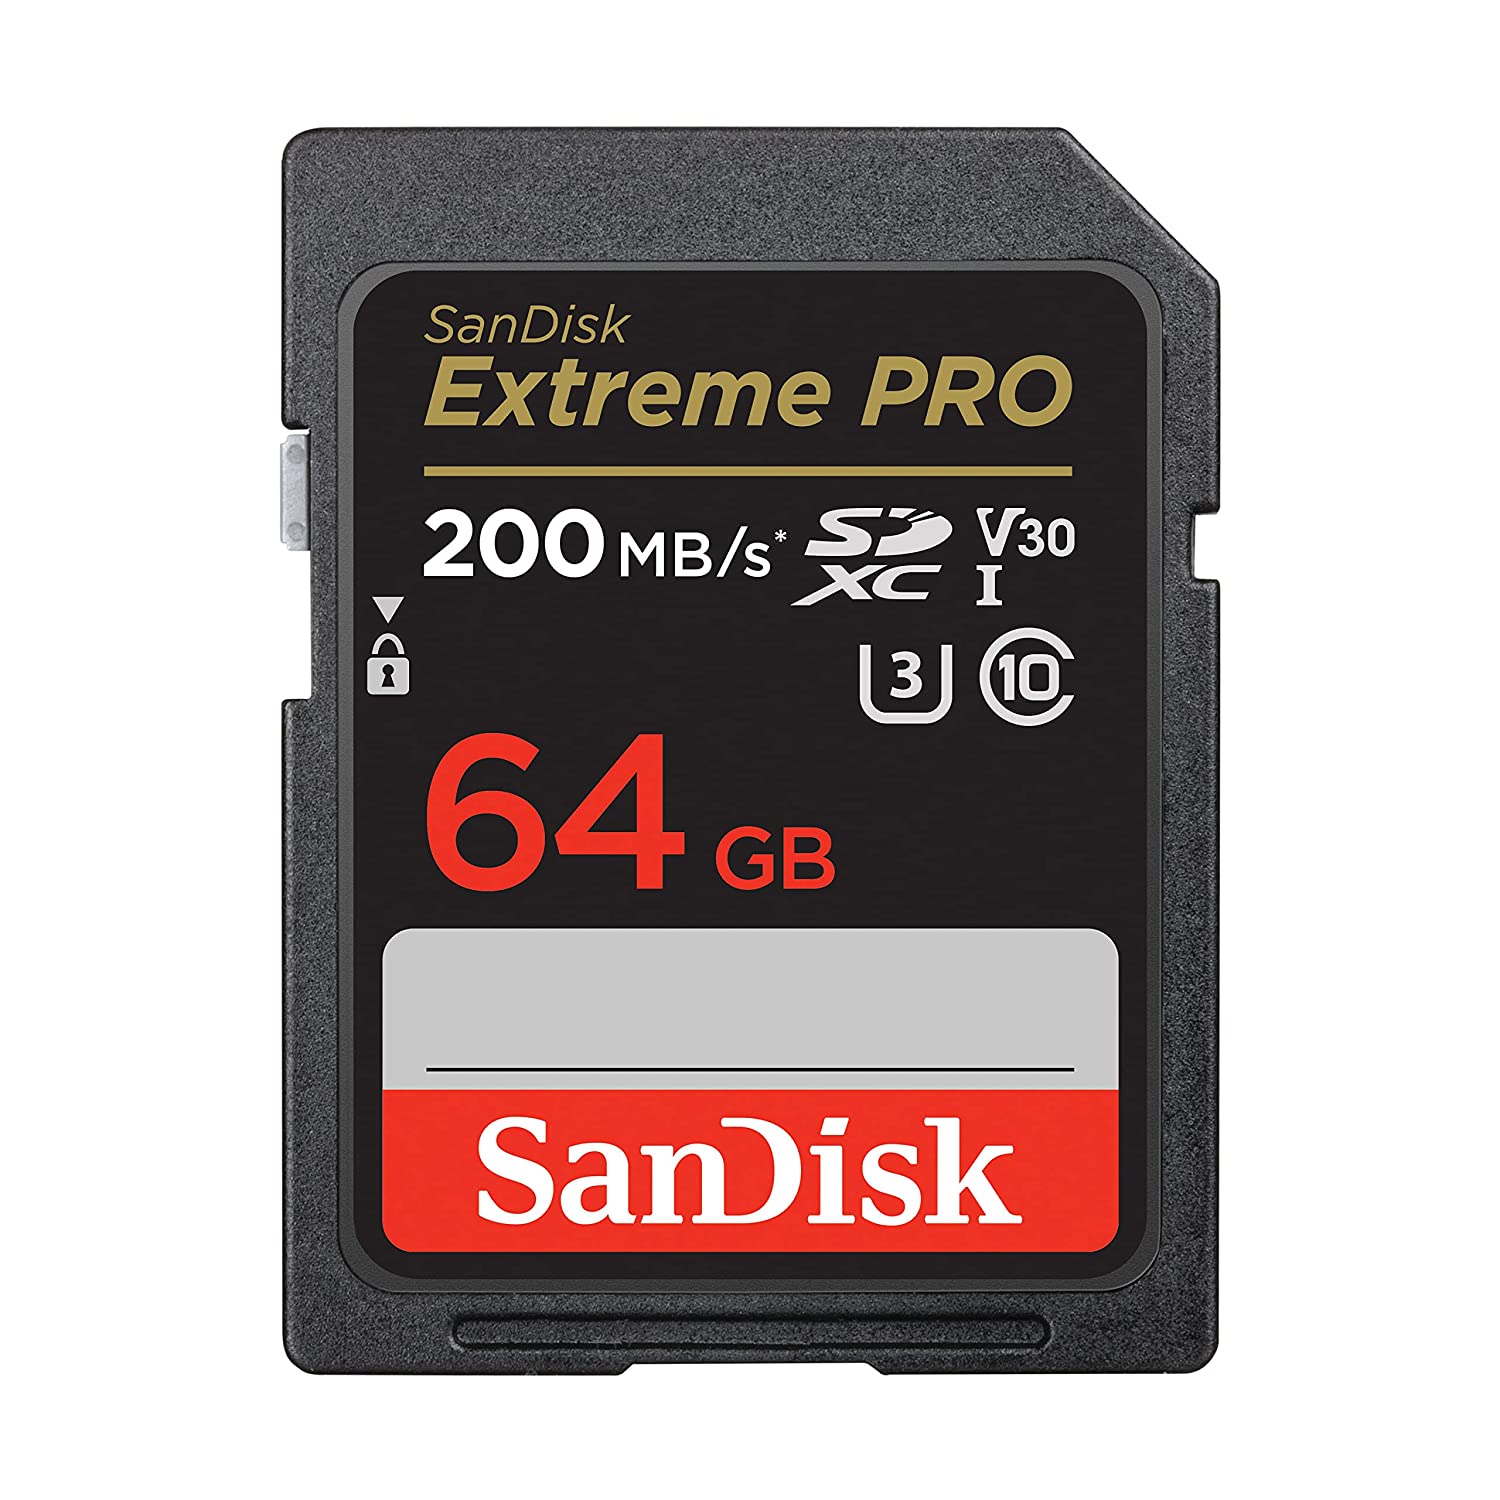 SanDisk Extreme Pro SD UHS I 64GB Card for 4K Video for DSLR and Mirrorless Cameras 200MB/s Read & 90MB/s Write - The Camerashop